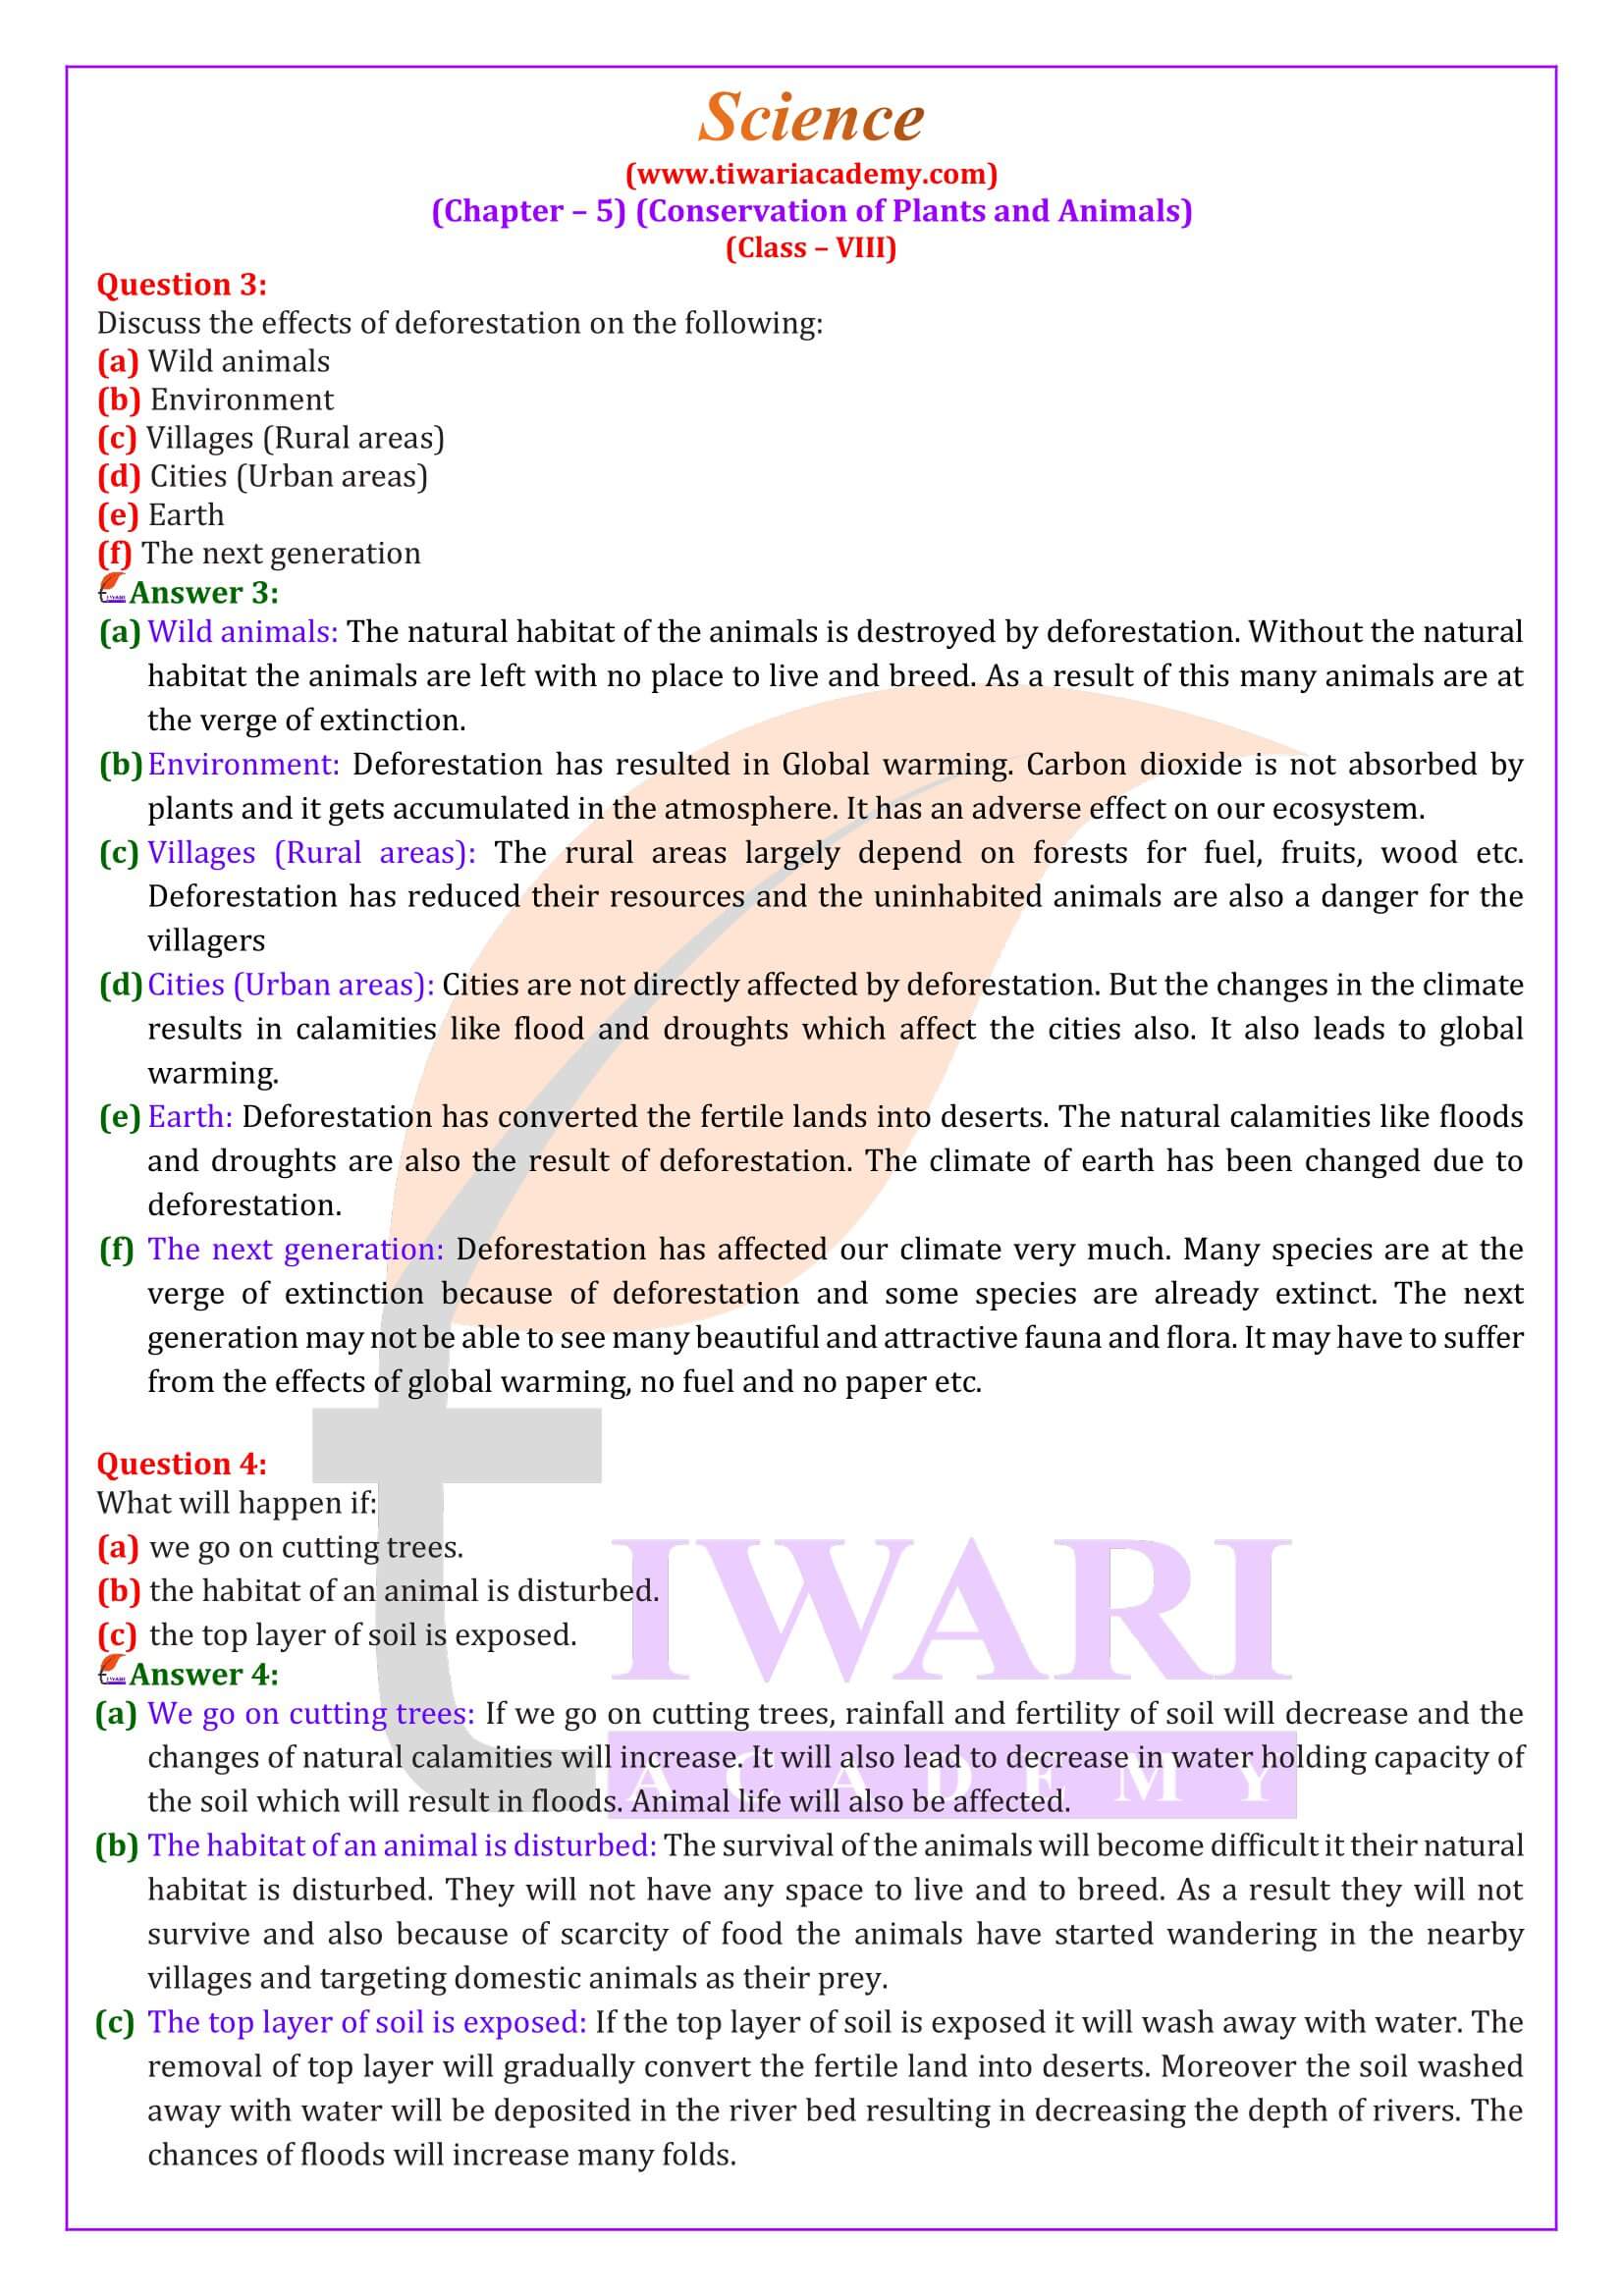 NCERT Solutions for Class 8 Science Chapter 5 in English Medium